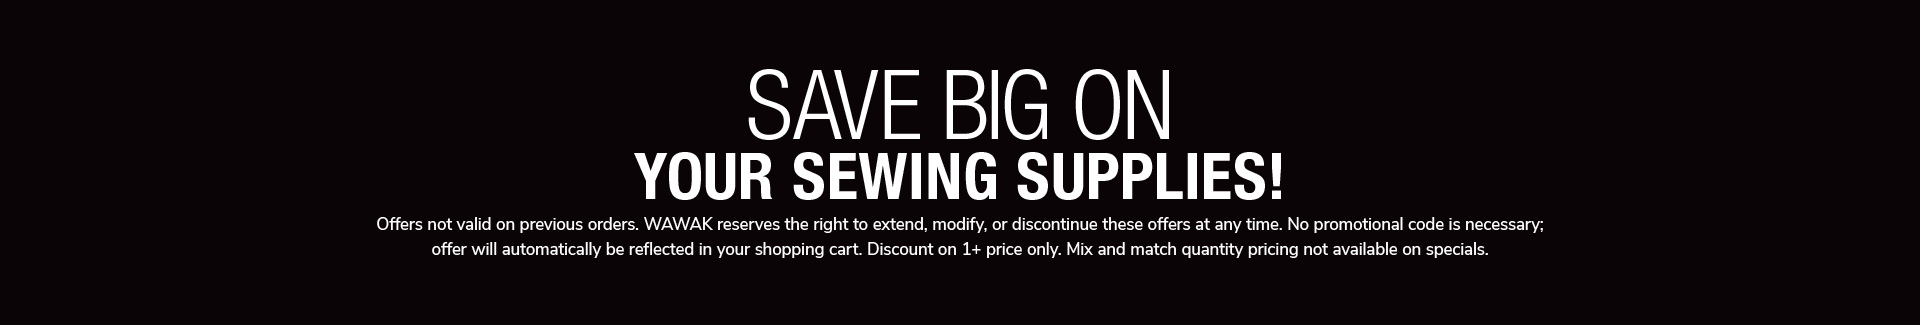 Save Big On Your Sewing Supplies! Offers not valid on previous orders. WAWAK reserves theright to extend, modify, or discontinue these offers any time. No promotional code is necessary; offer will automatically be reflected in your shopping cart. Discount on 1+ price only. Mix and match quantity pricing not available on specials.